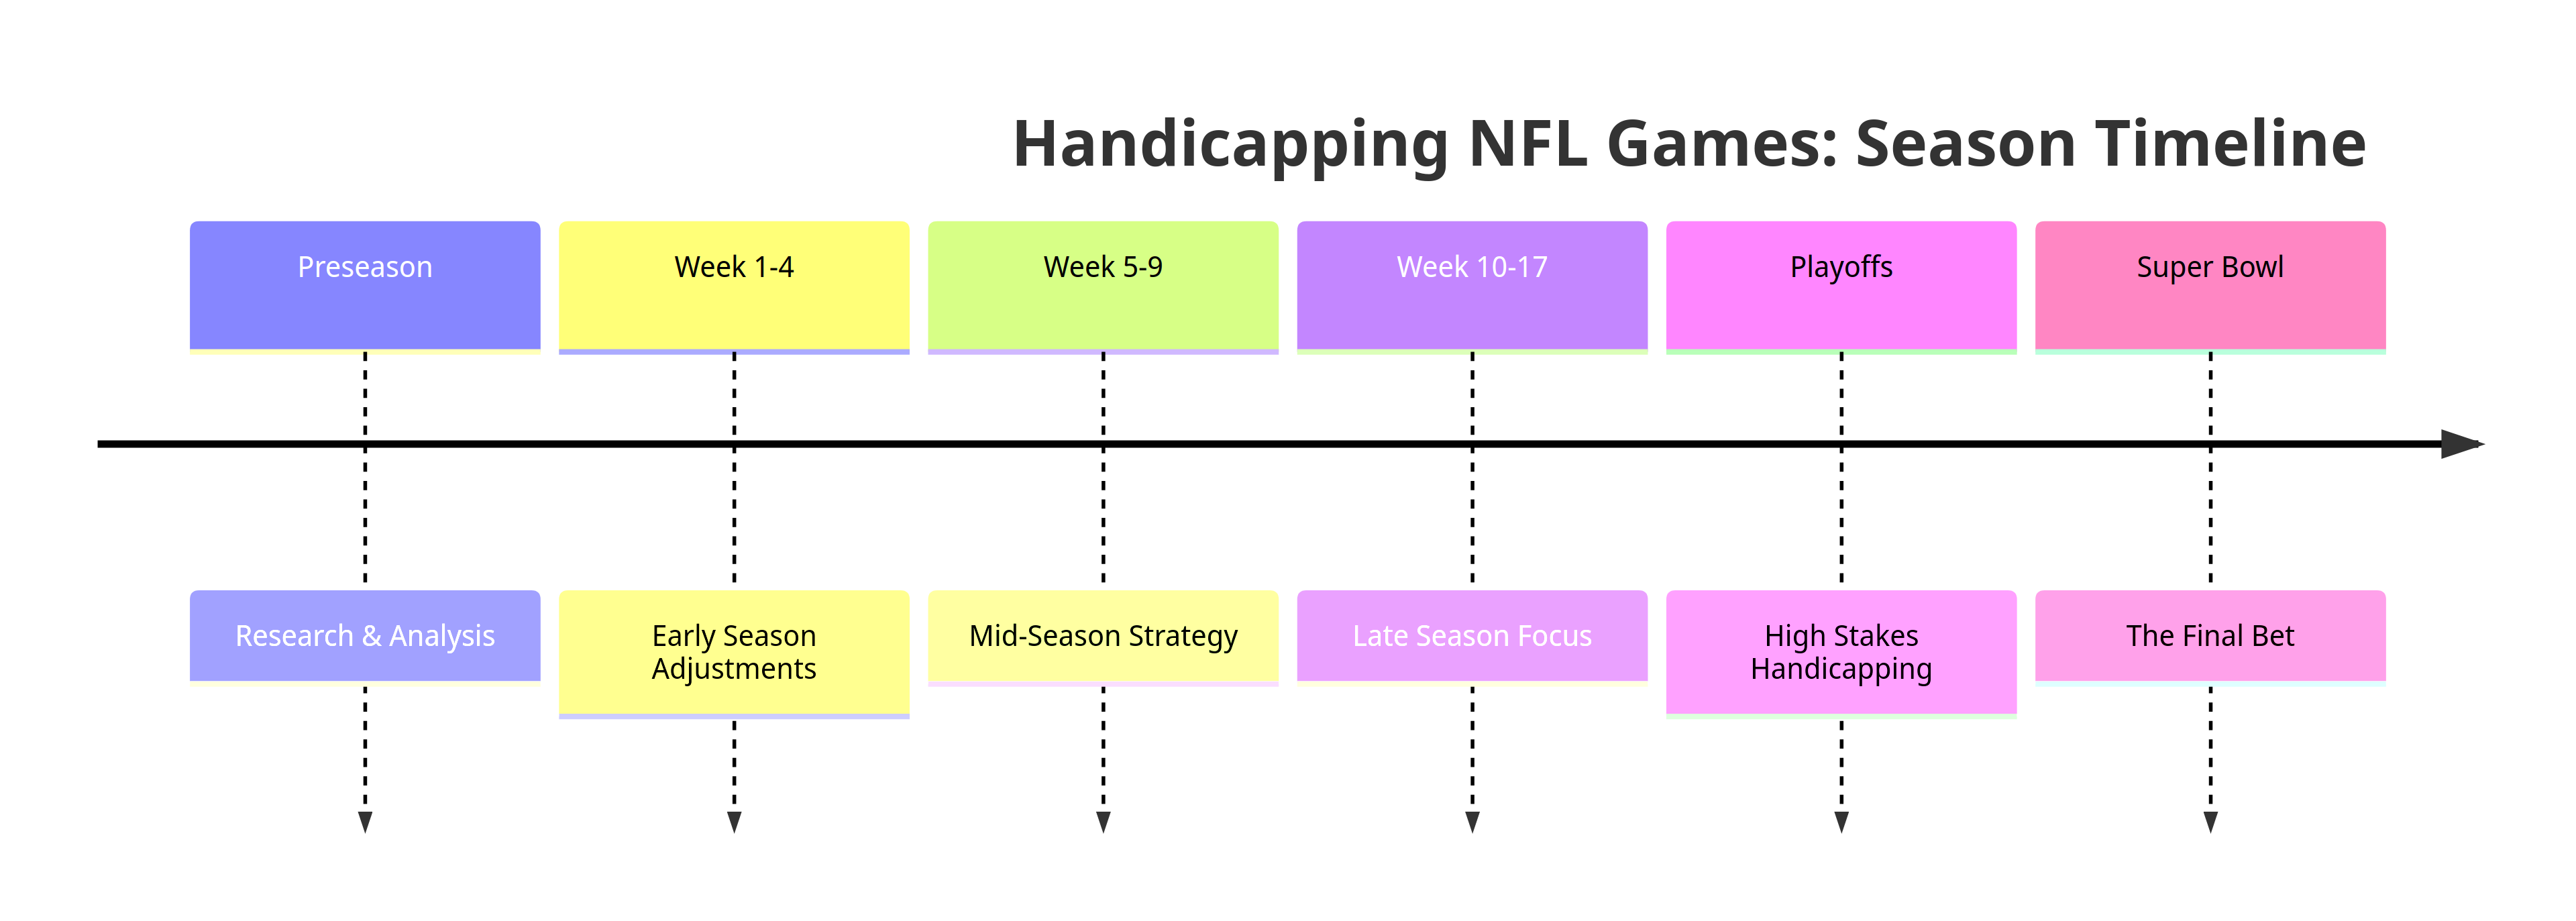 Handicapping NFL games